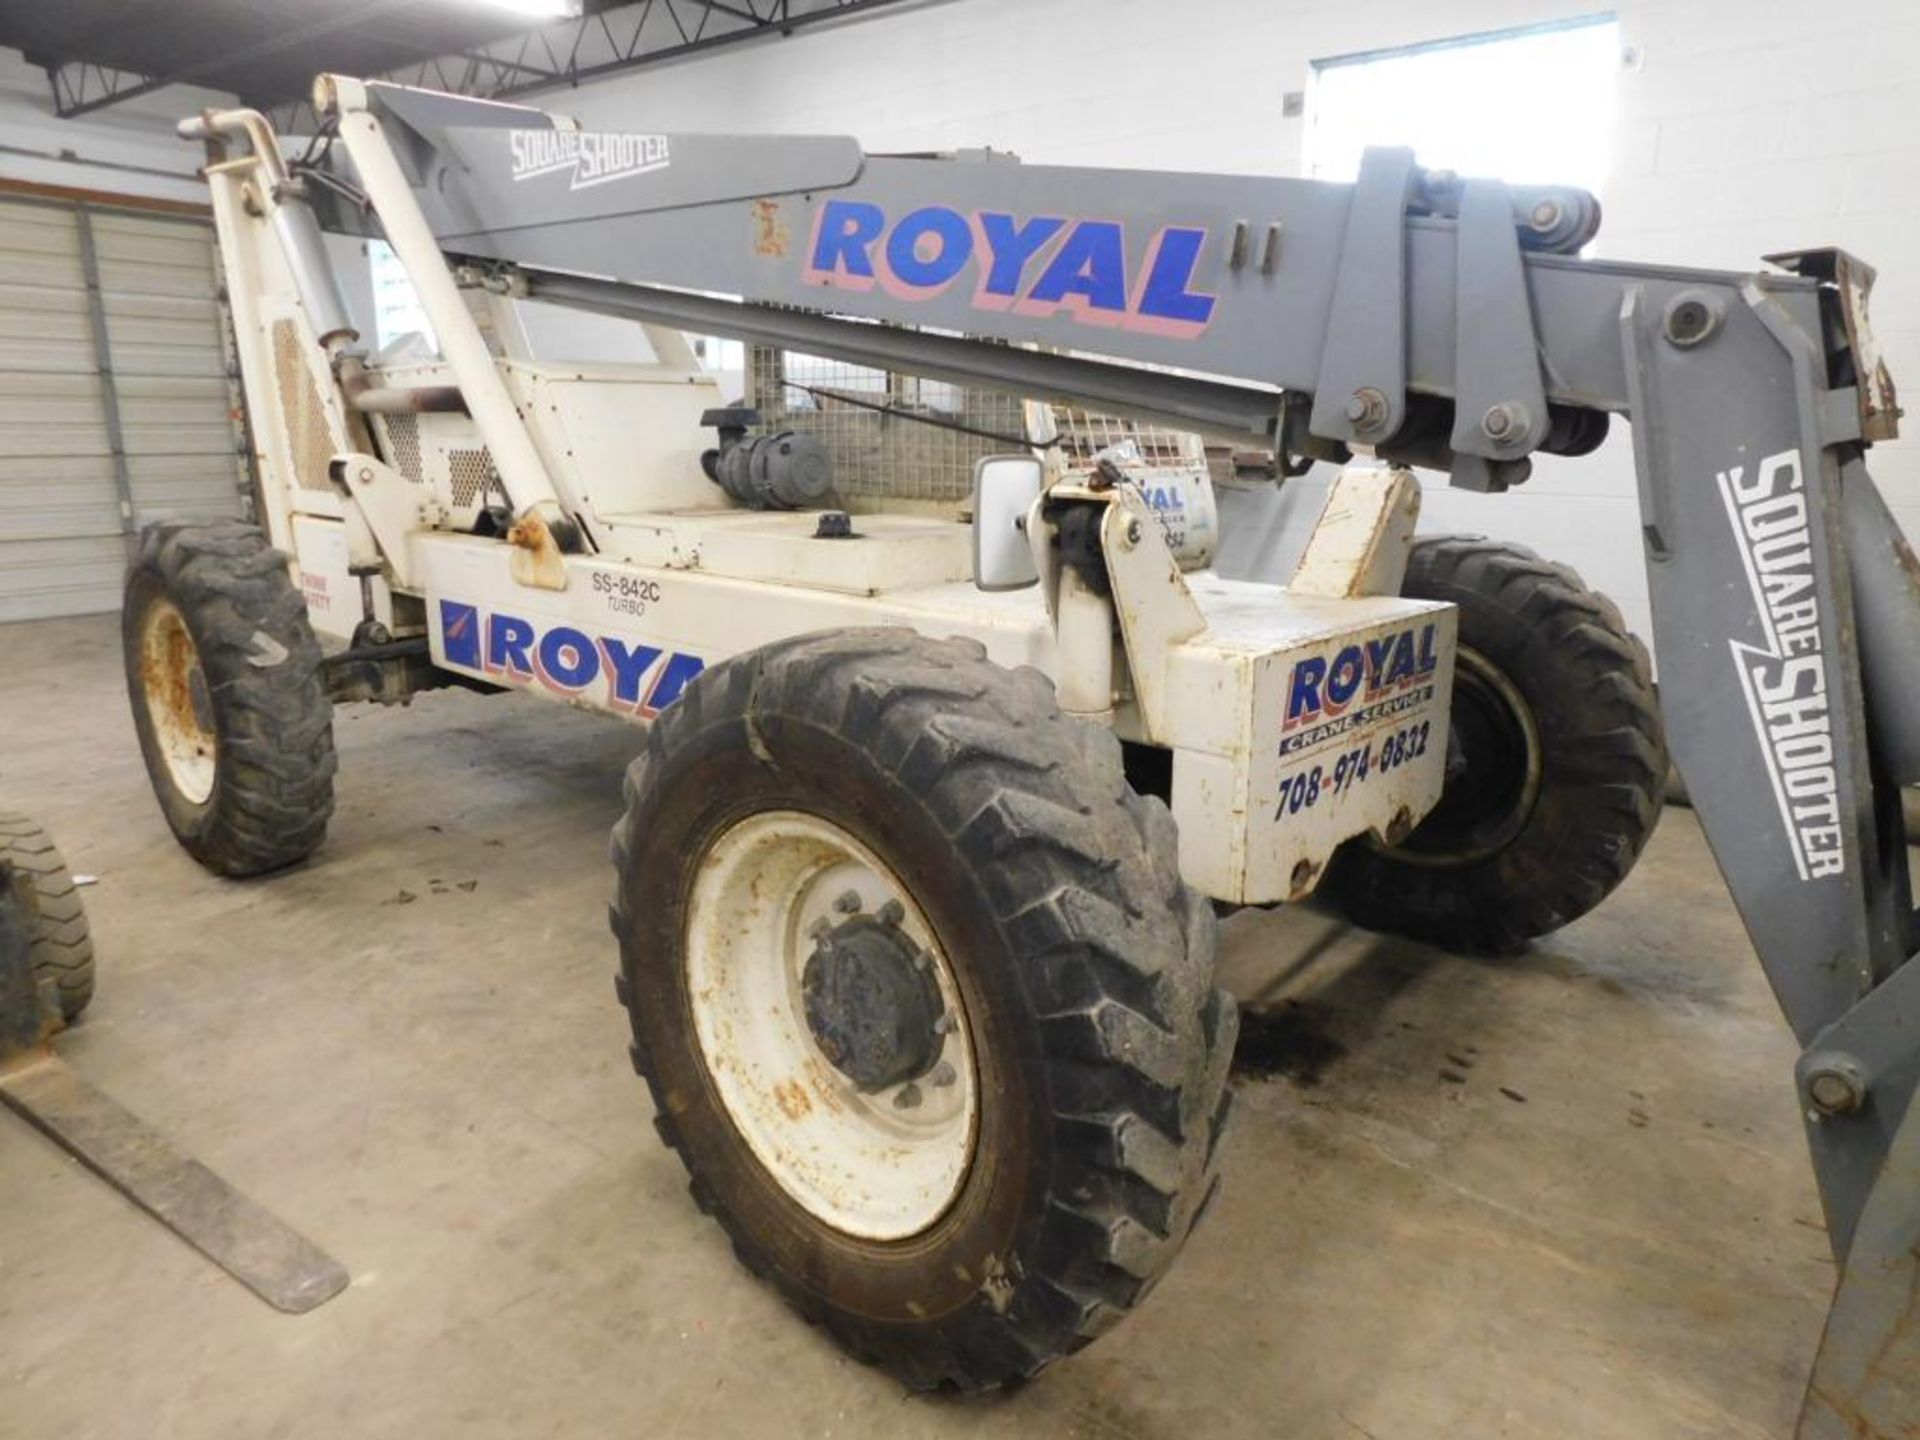 Terex SS840 Telescopic Forklift, 4' Forks, 8,000 Lb. Capacity, S/N 014155, 3,395 Indicated Hours (LO - Image 2 of 15